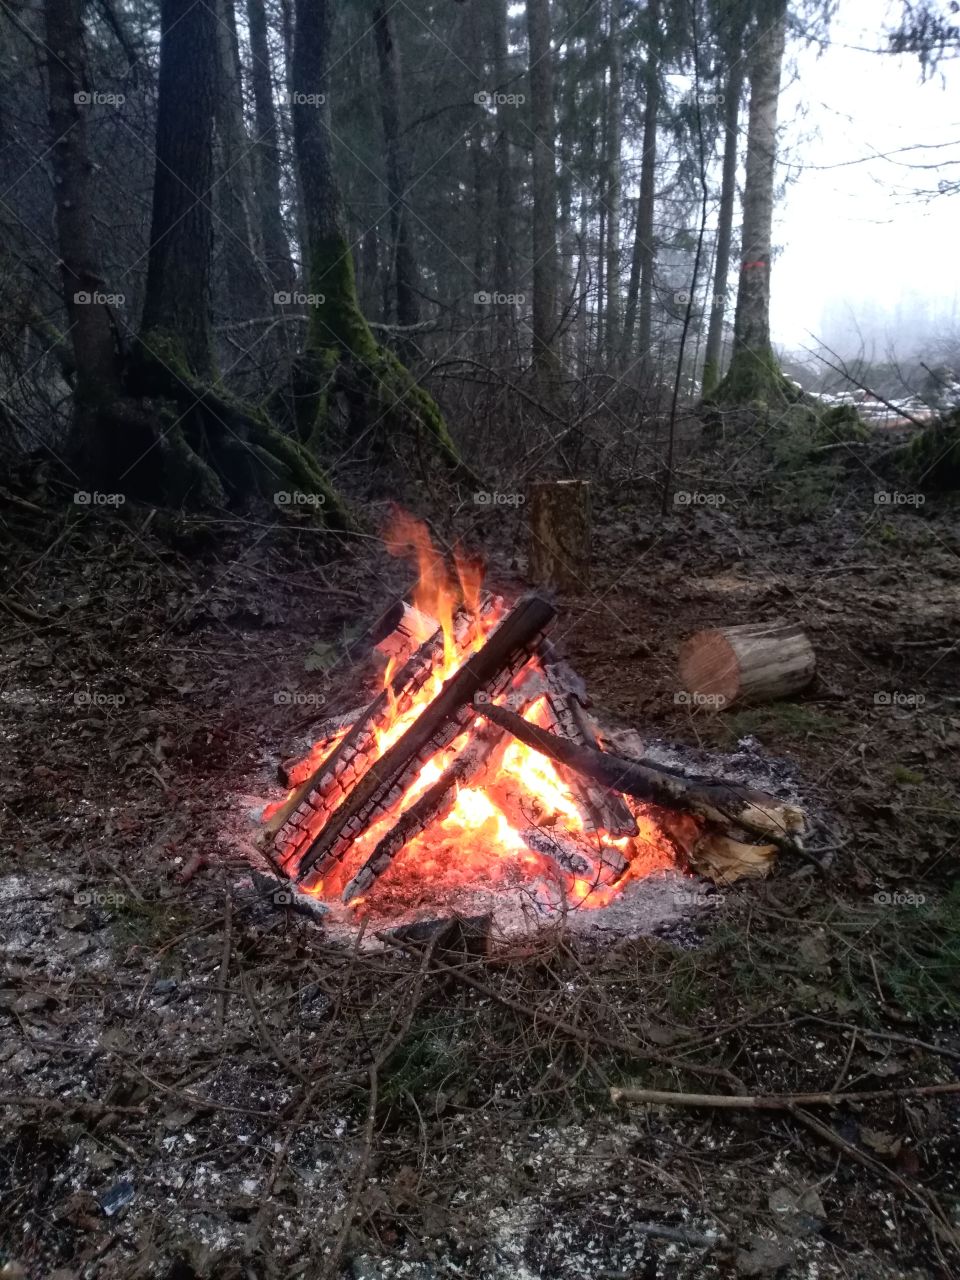 Fire place in the forest.